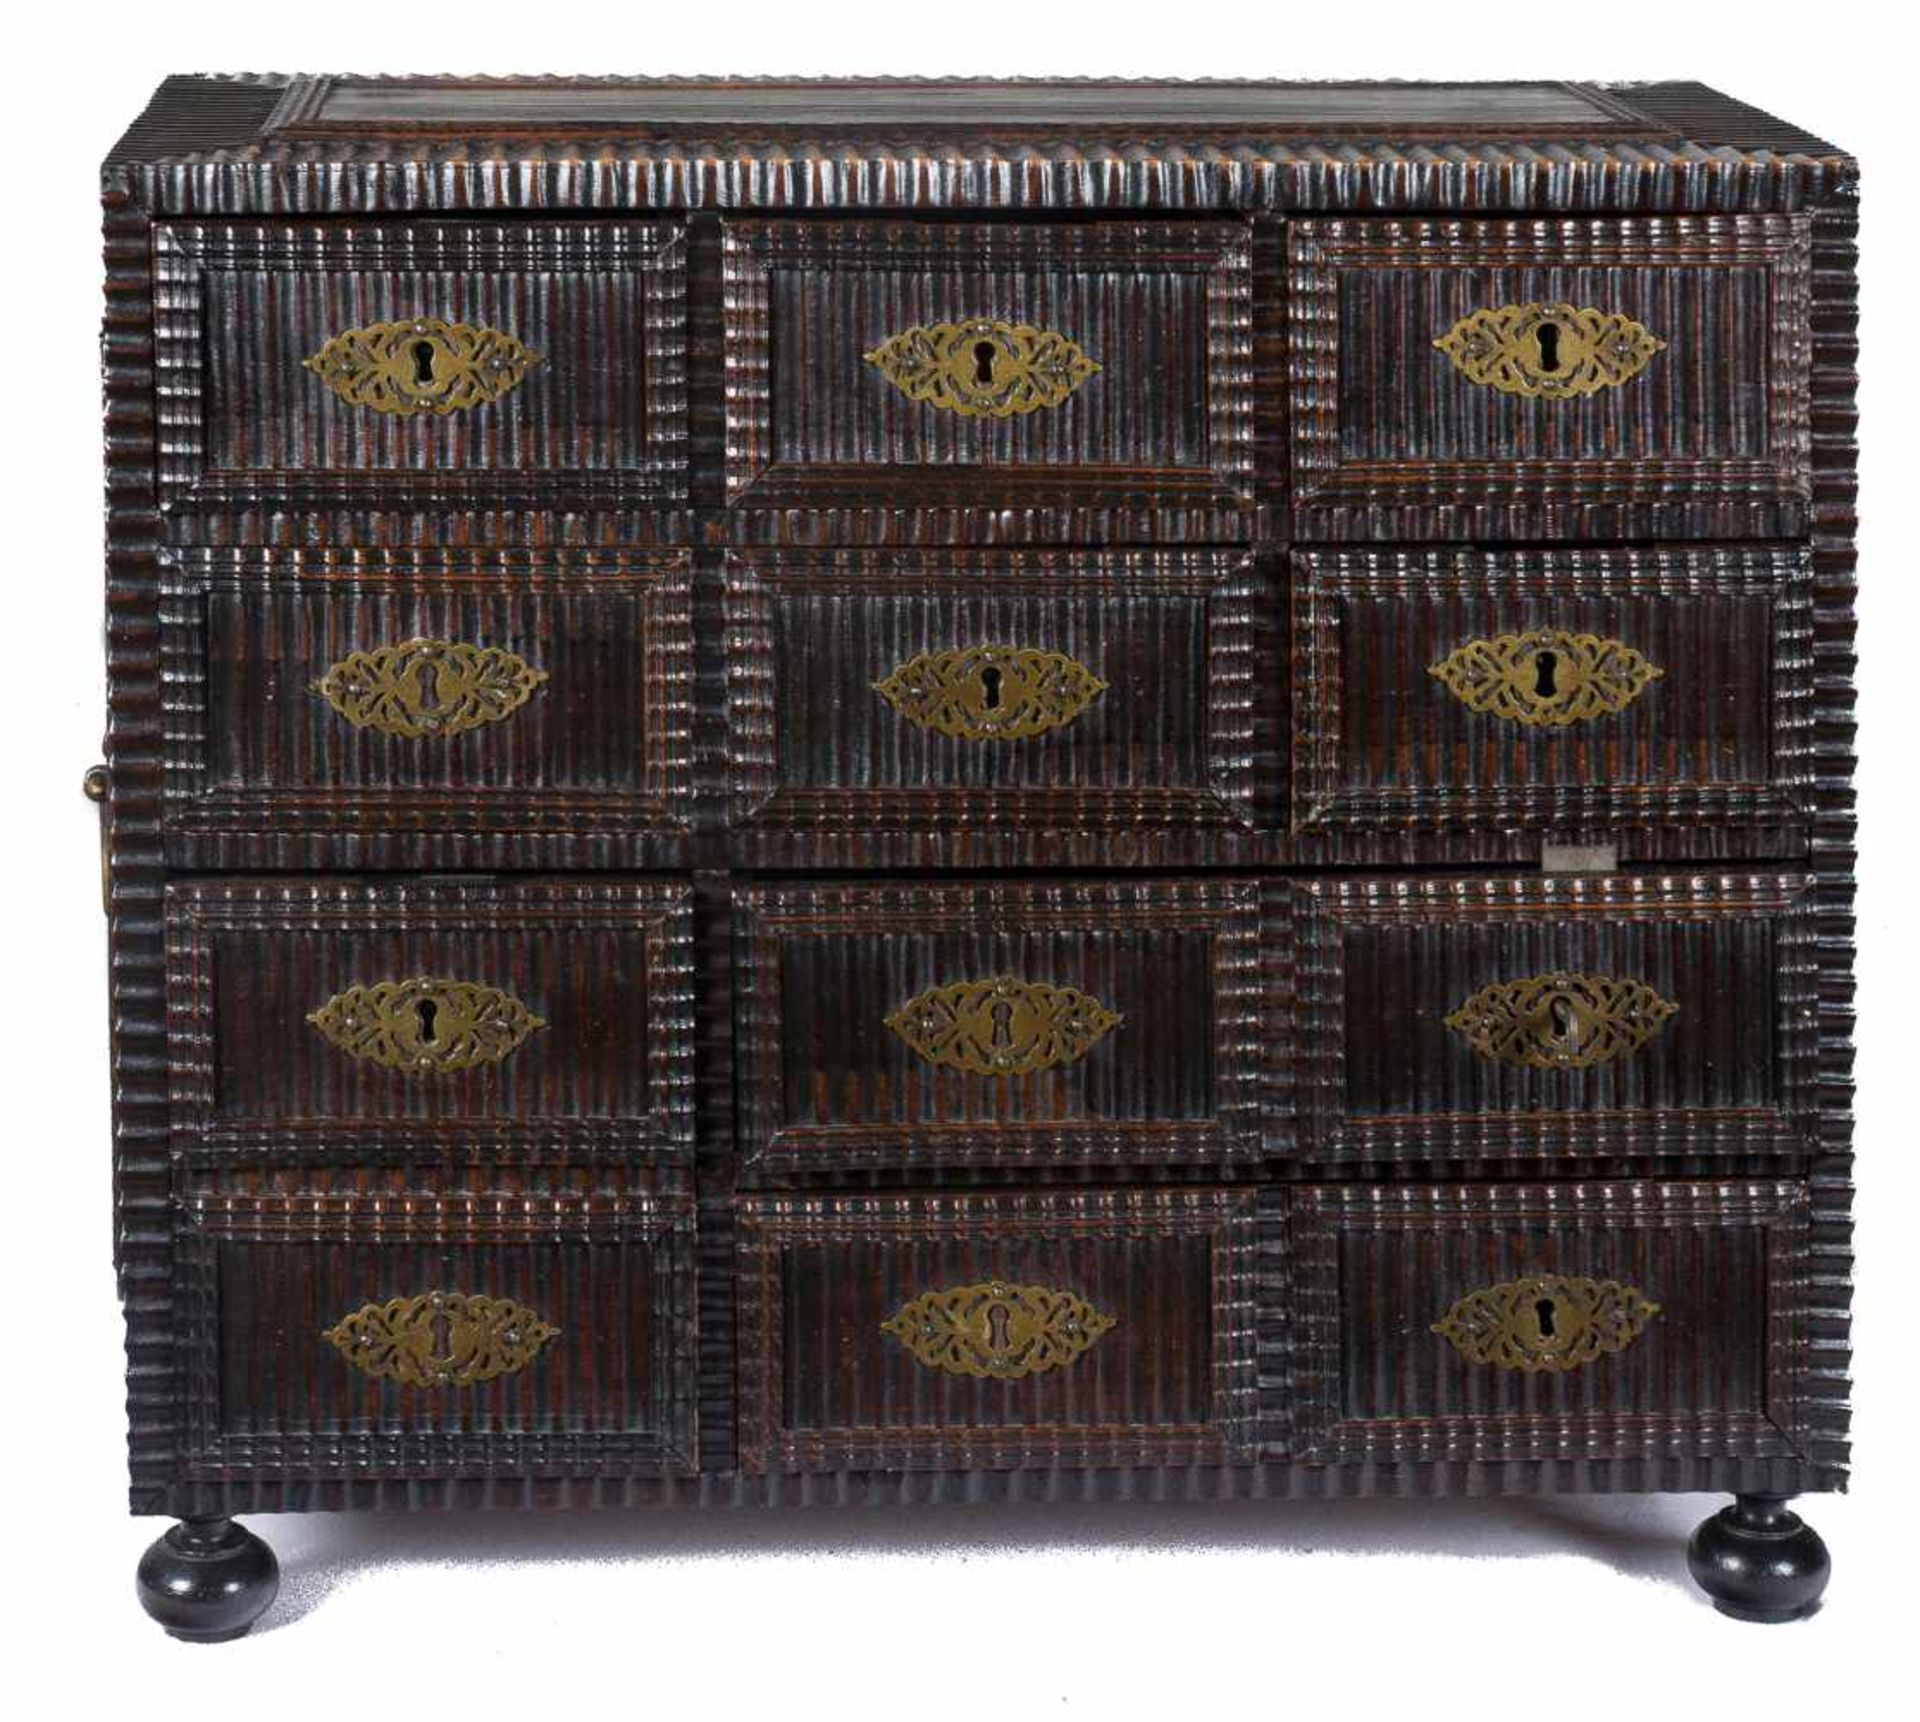 Carved palo santo wooden chest with bronze fittings. Portugal. 18th century.53,5 x 61,5 x 23,5 - Bild 2 aus 3